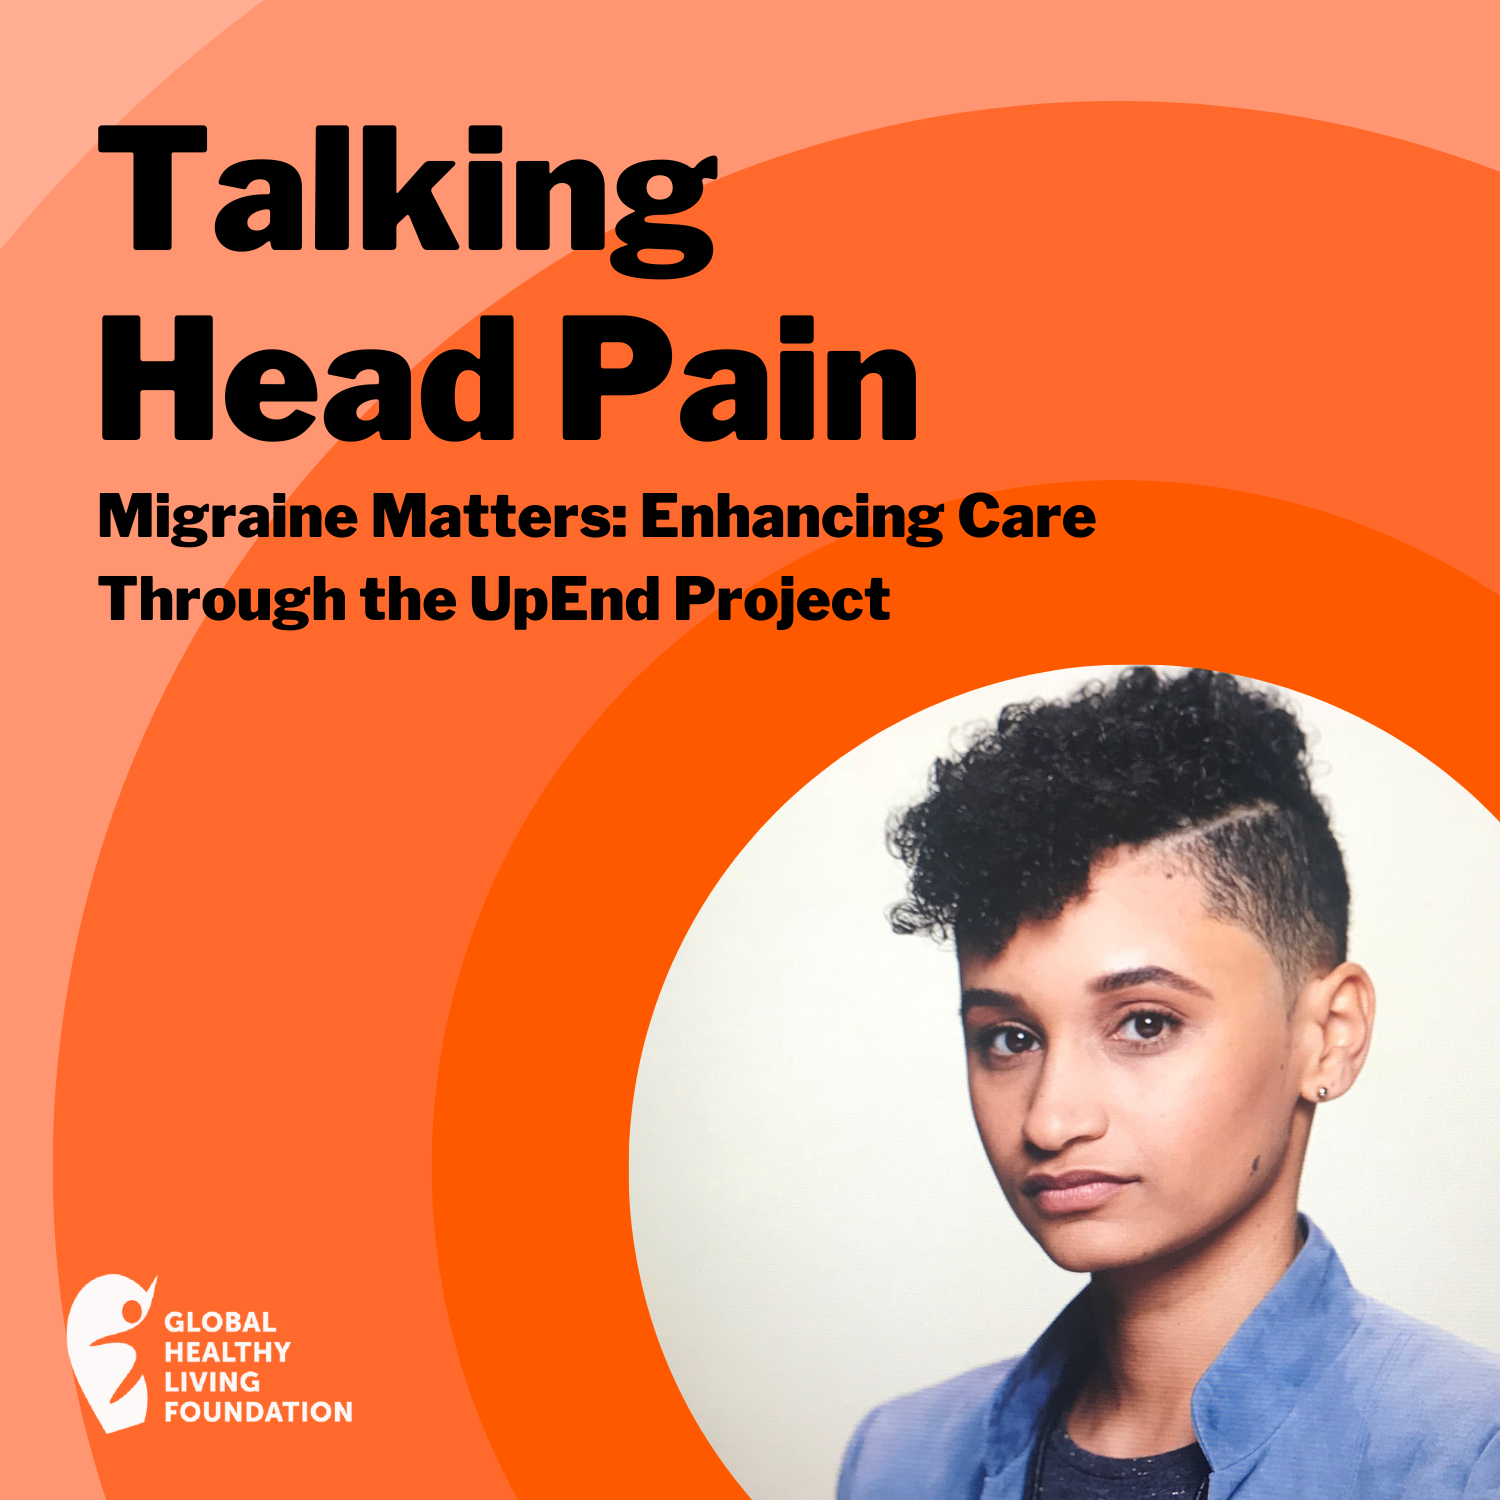 Migraine Matters: Enhancing Care Through the UpEnd Project